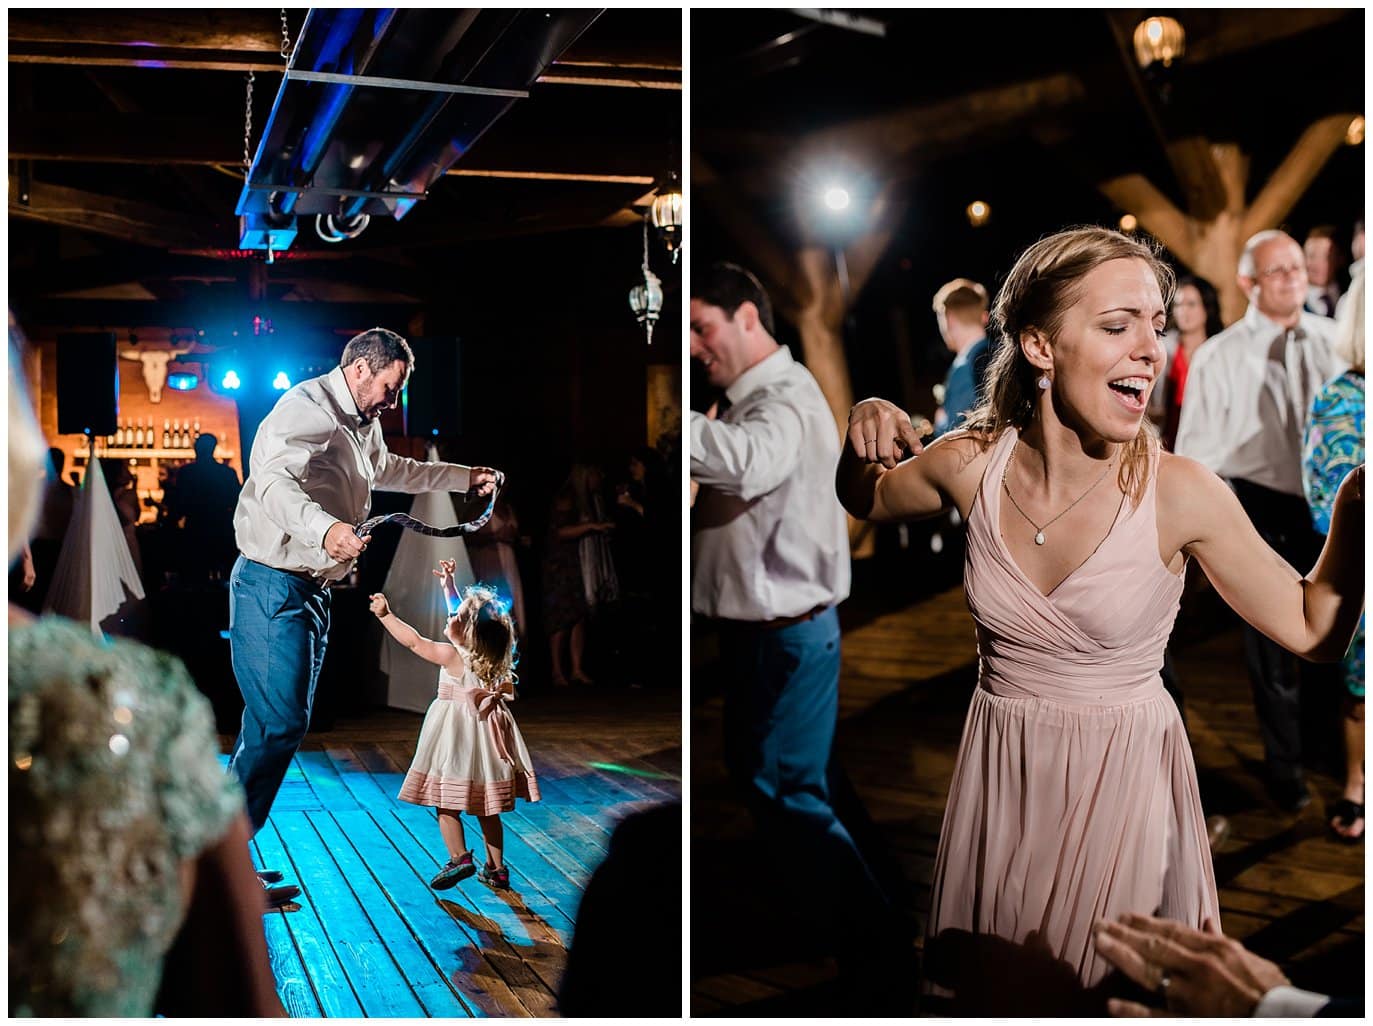 guests dancing during wedding reception at Piney River Ranch Summer Wedding by Beaver Creek wedding photographer Jennie Crate photographer